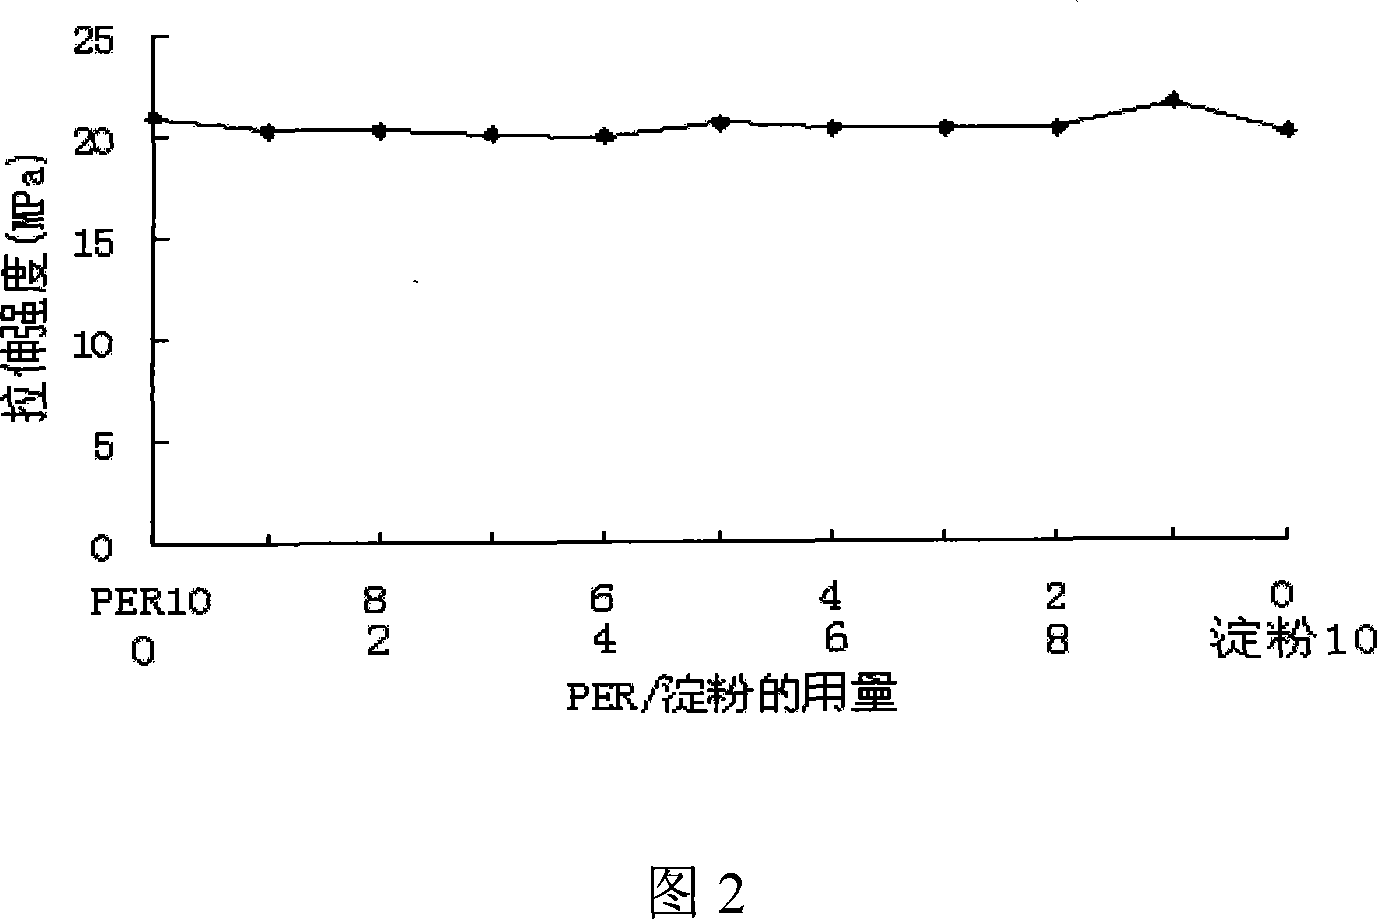 Non-bittern expanding flame-proof material and method for making same